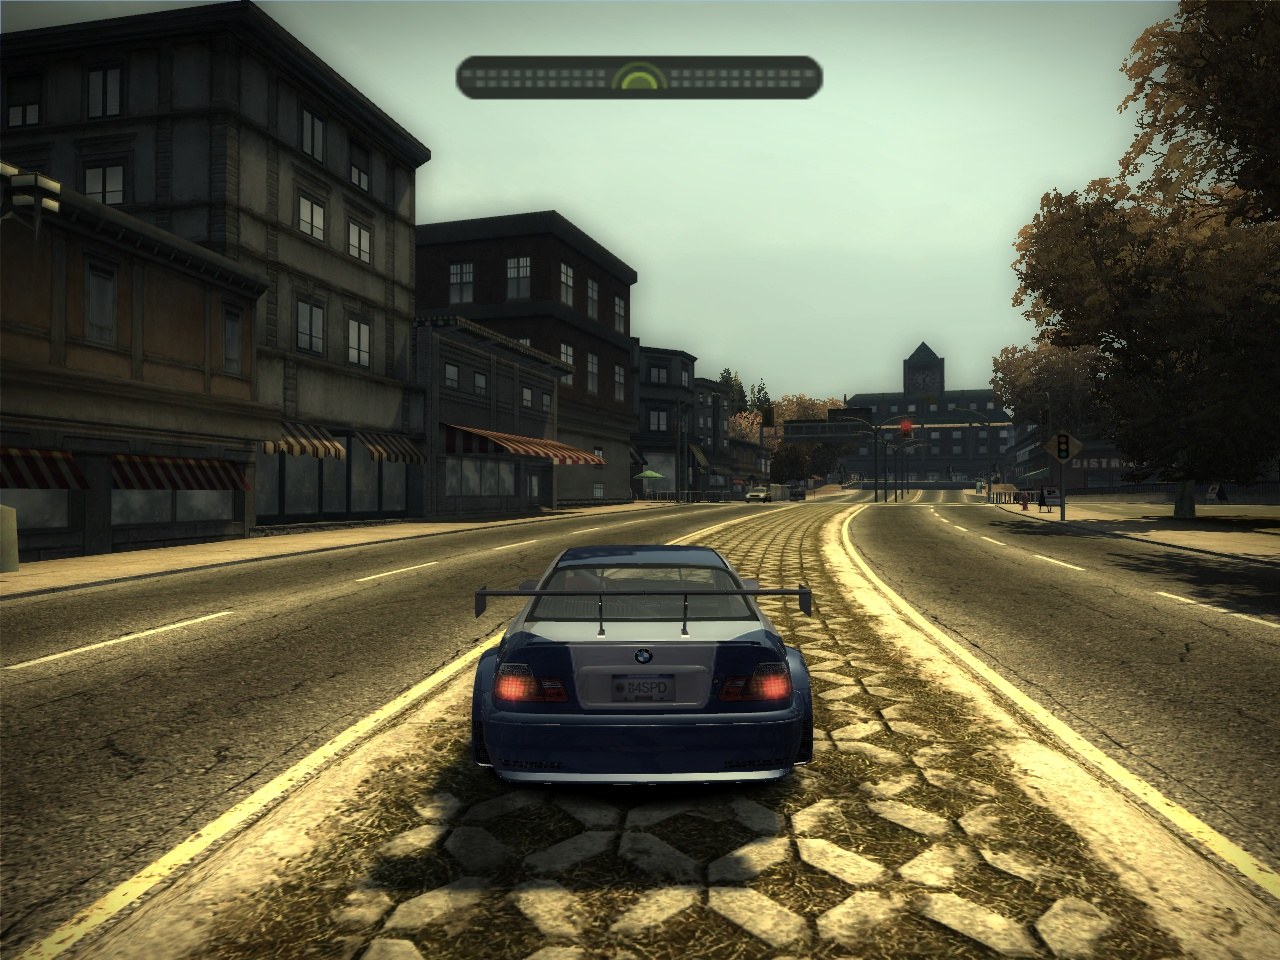 Игры гонки нид фор спид. Need for Speed most wanted 2005. Нфс most wanted. NFS most wanted 2005 мост. Гонки NFS most wanted 2005.